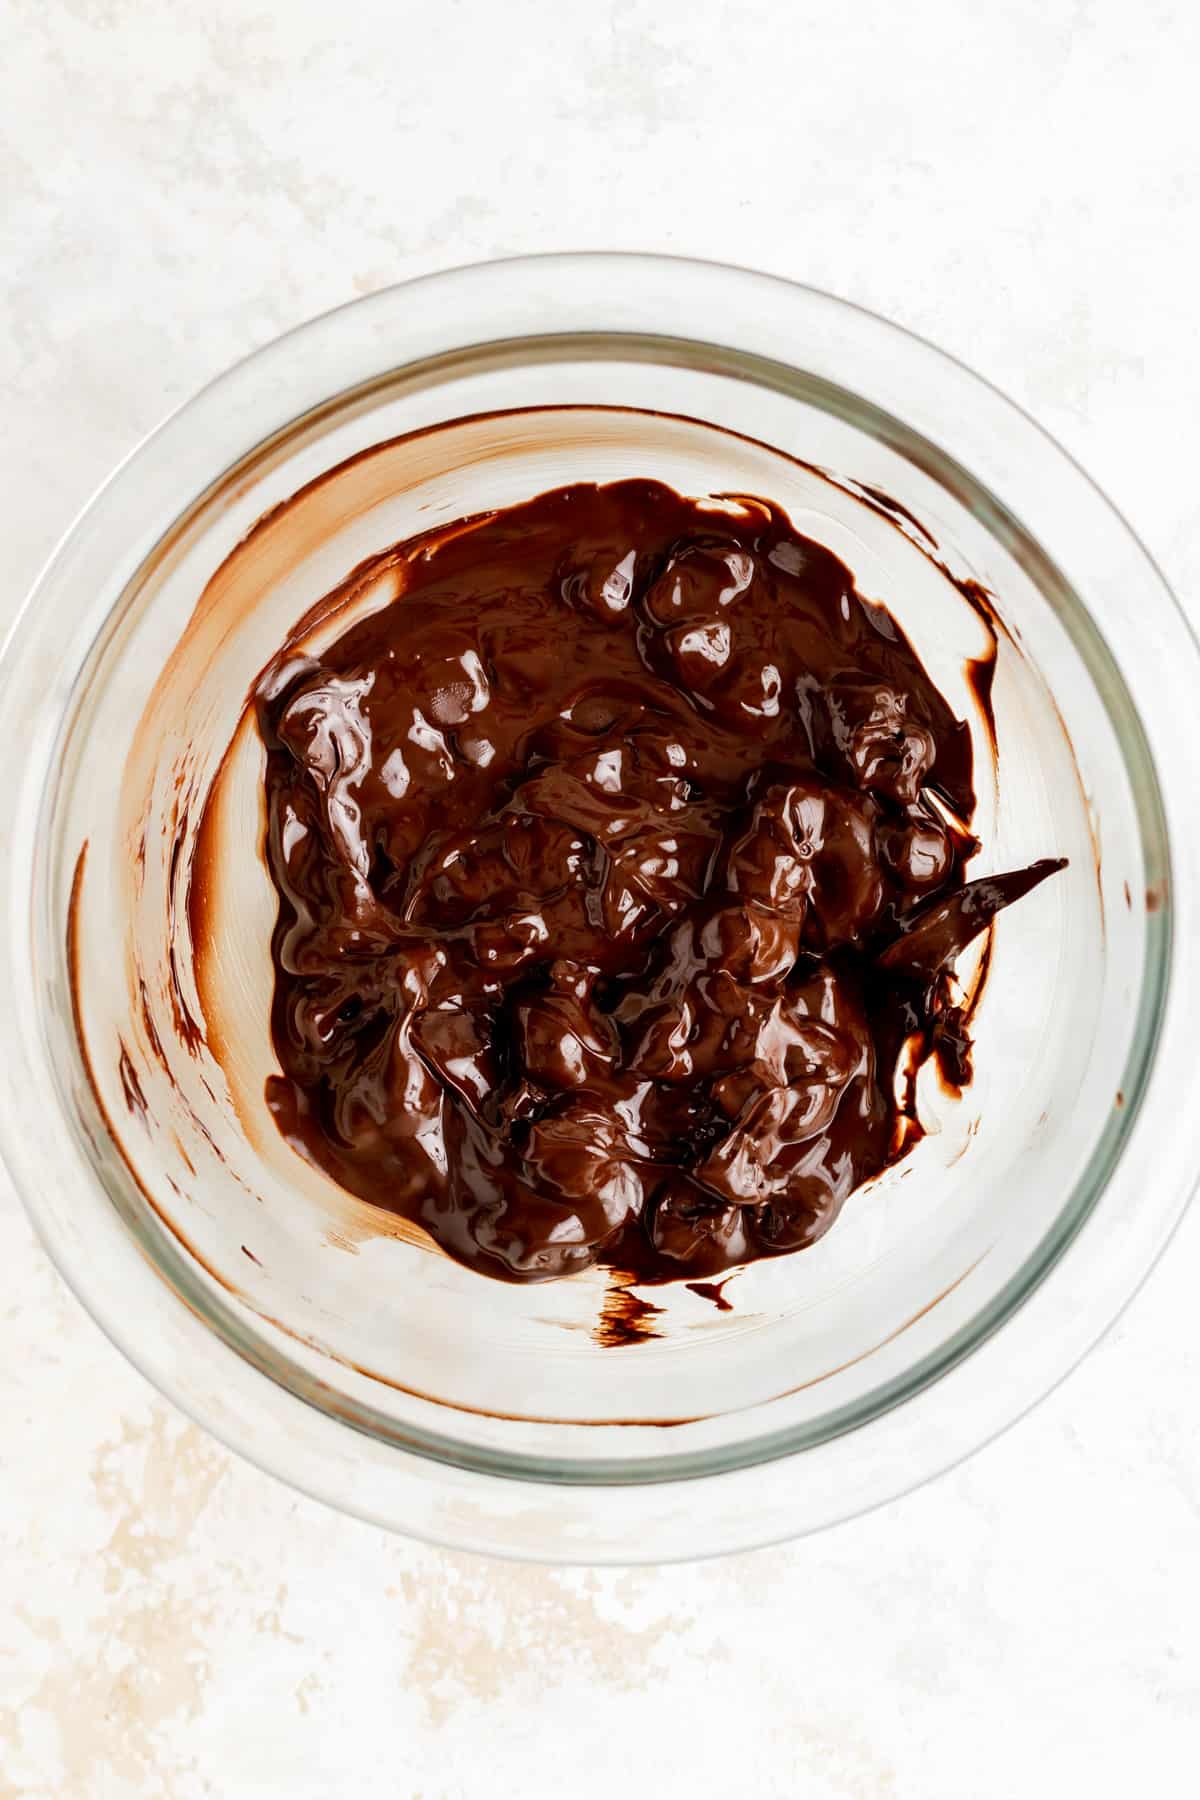 overhead view of partially melted chocolate chips in a glass bowl after 1 minute of microwaving.